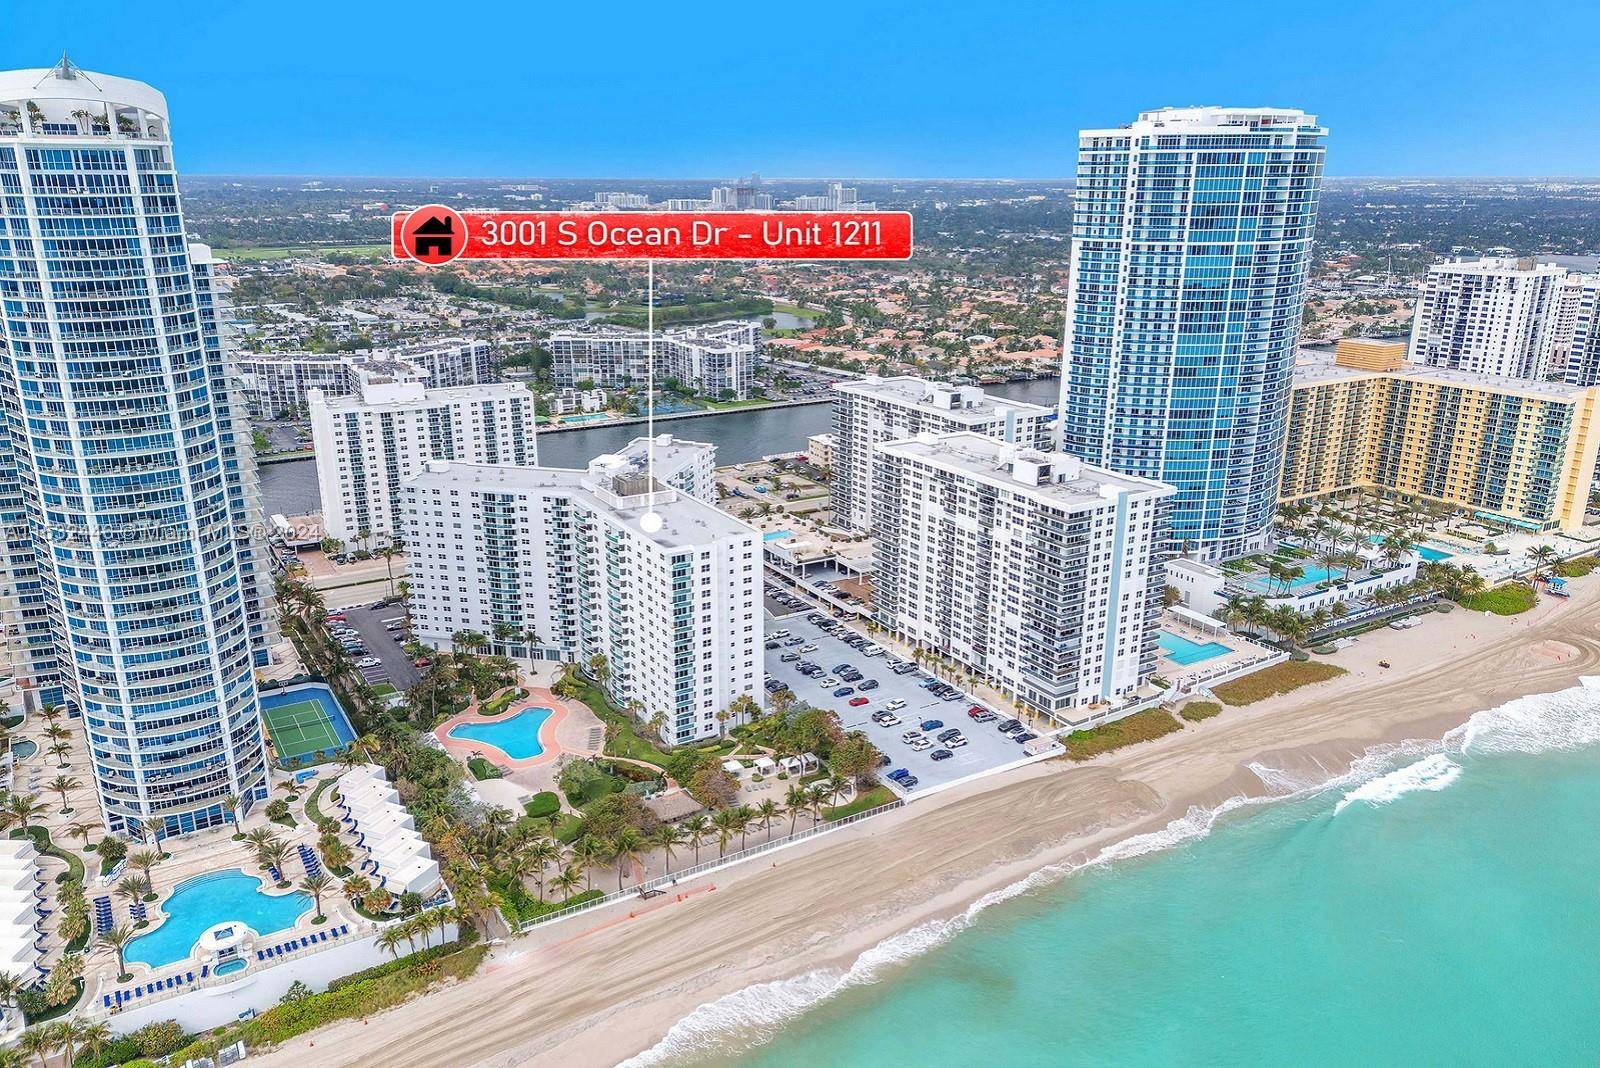 EXPERIENCE OCEANFRONT LIVING AT ITS FINEST FROM THE 12TH FLOOR OF THE LUXURIOUS RESIDENCES ON HOLLYWOOD BEACH BUILDING.